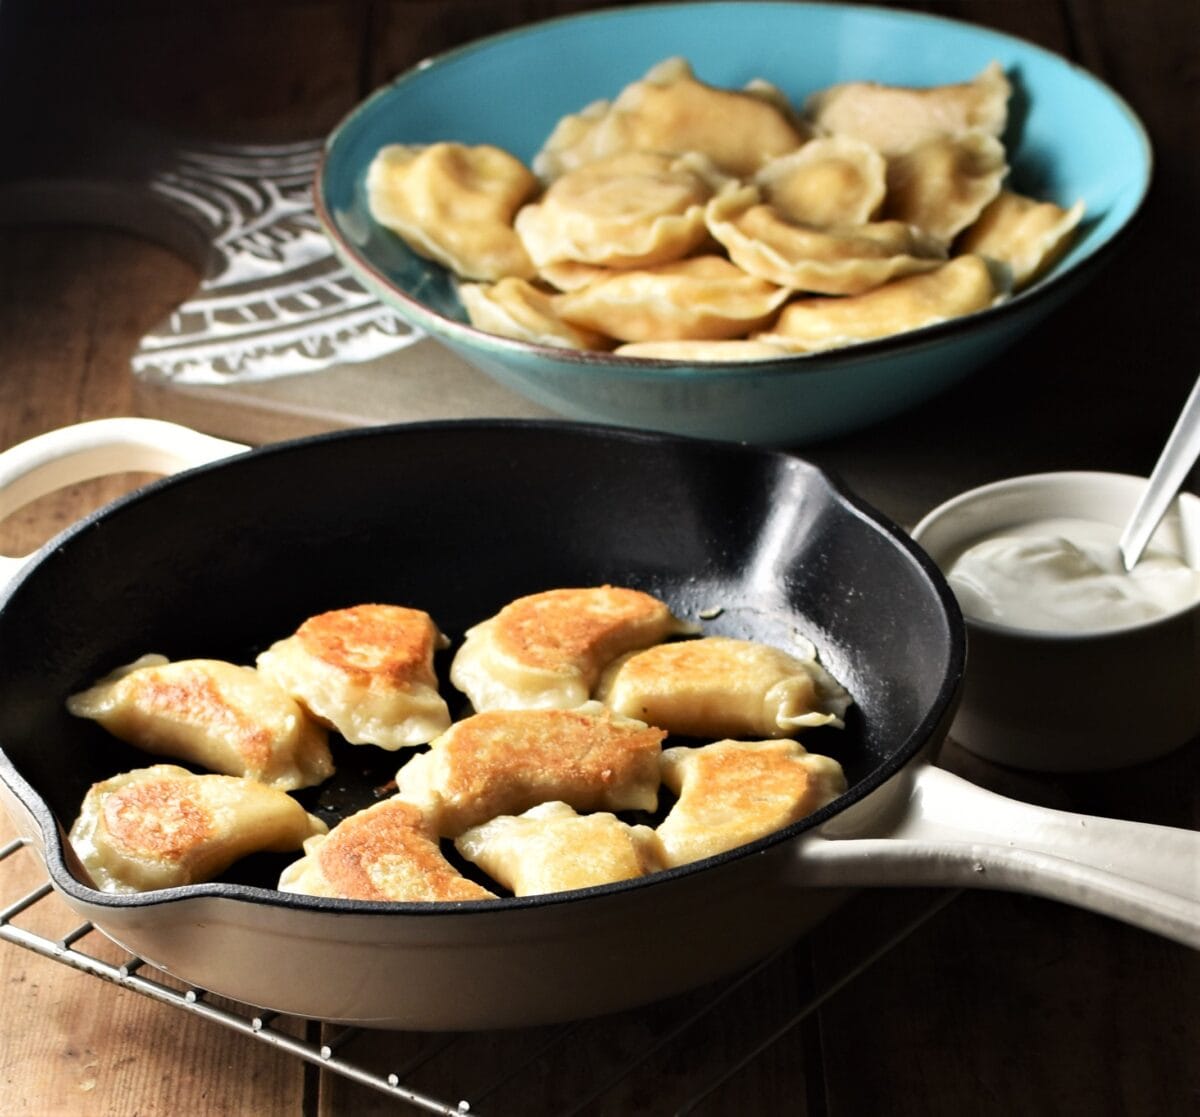 Side view of fried pierogies in pan, with perogies in blue bowl and sour cream in background.